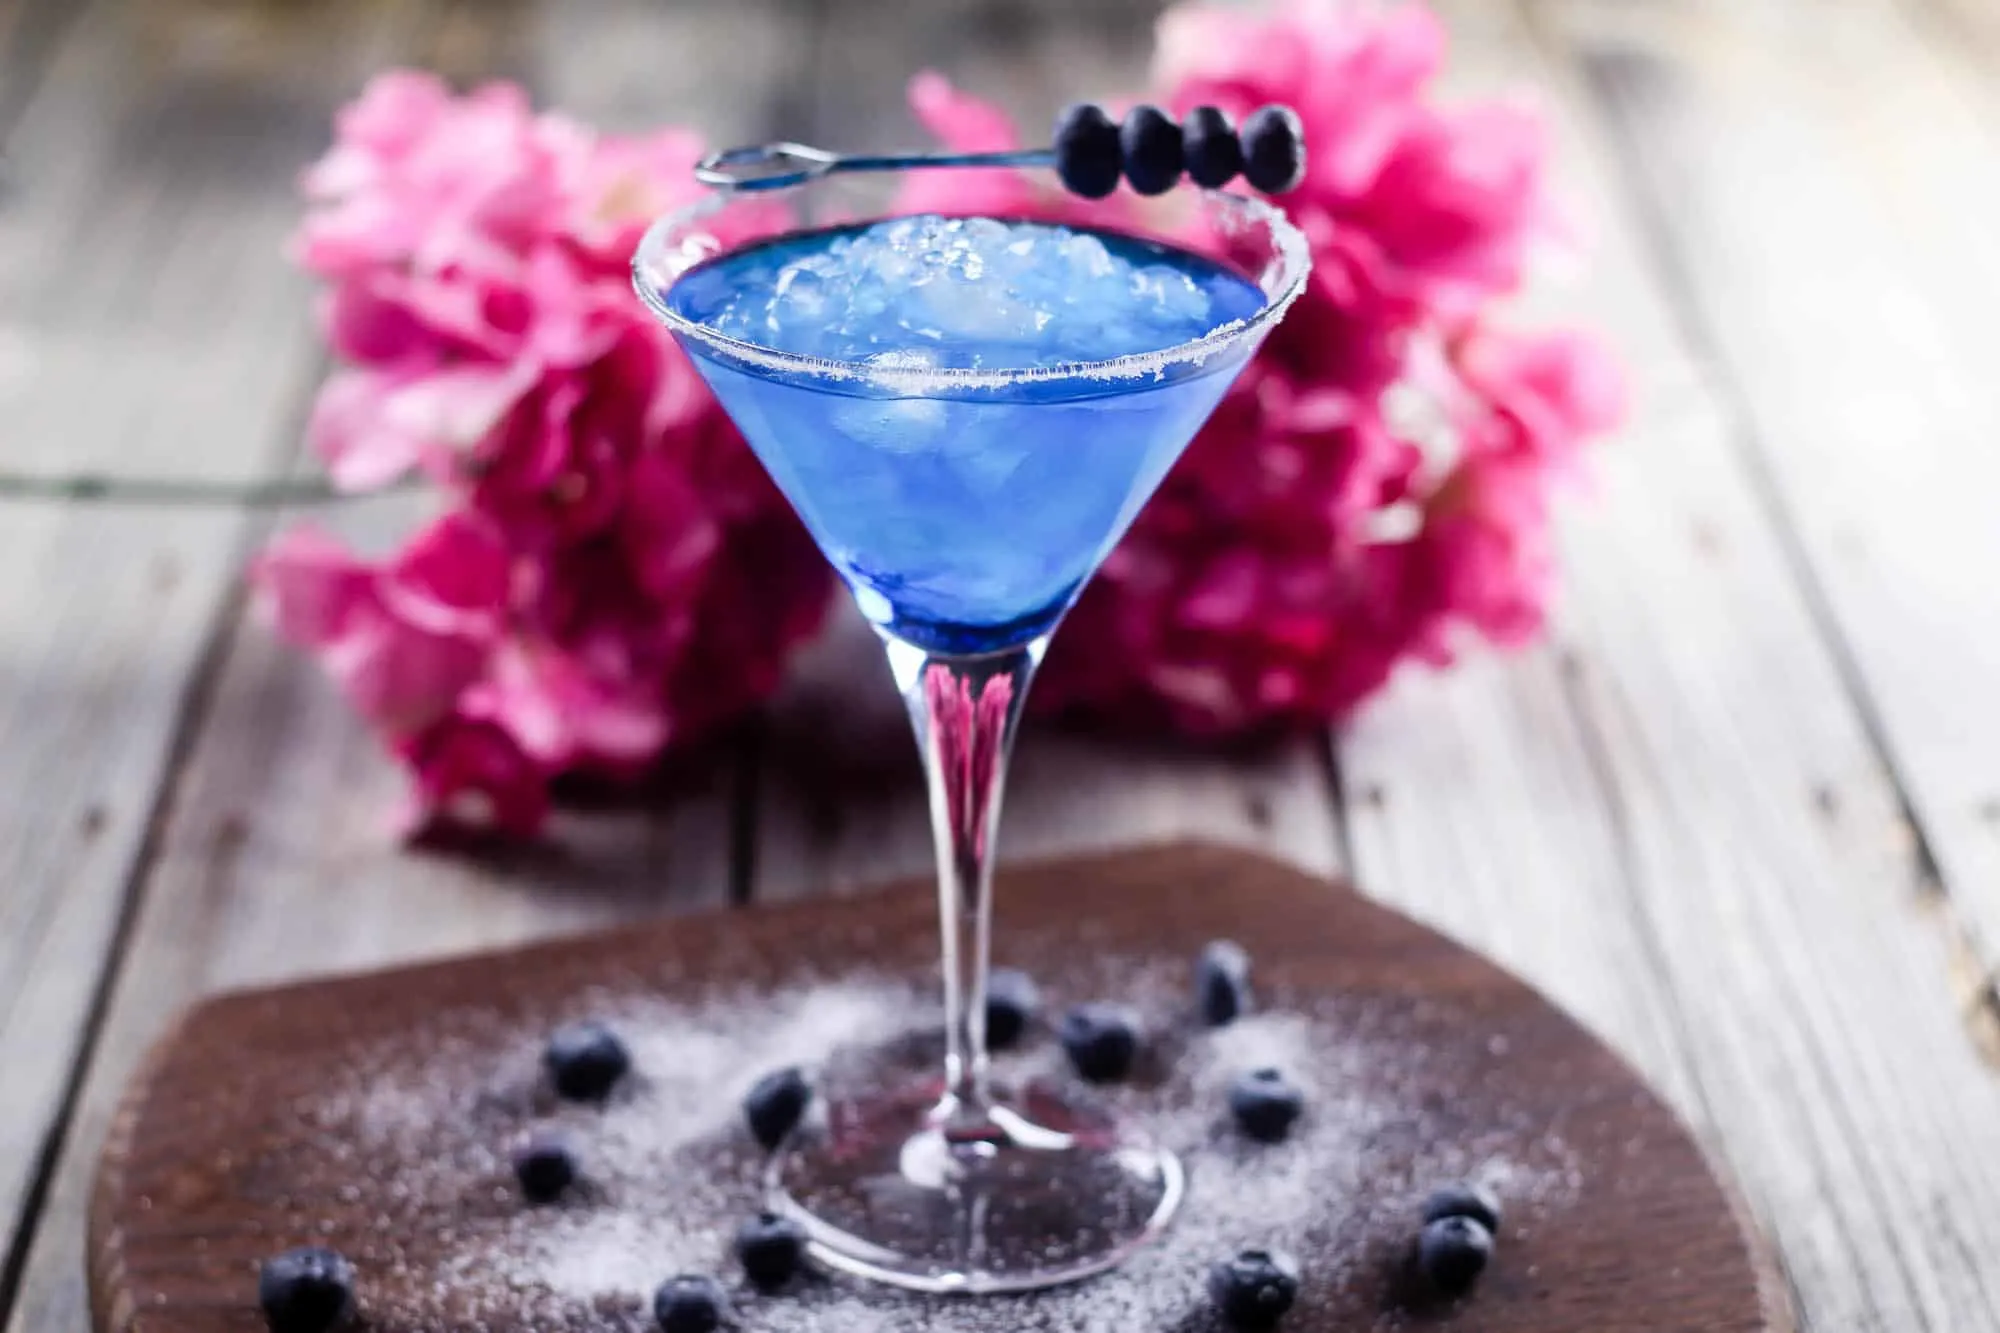 Make this delicious blueberry margarita cocktail in minutes! You'll taste the margarita flavor with a pretty blue color. Use fresh blueberries to adorn the glass and salted sugar on the rim!